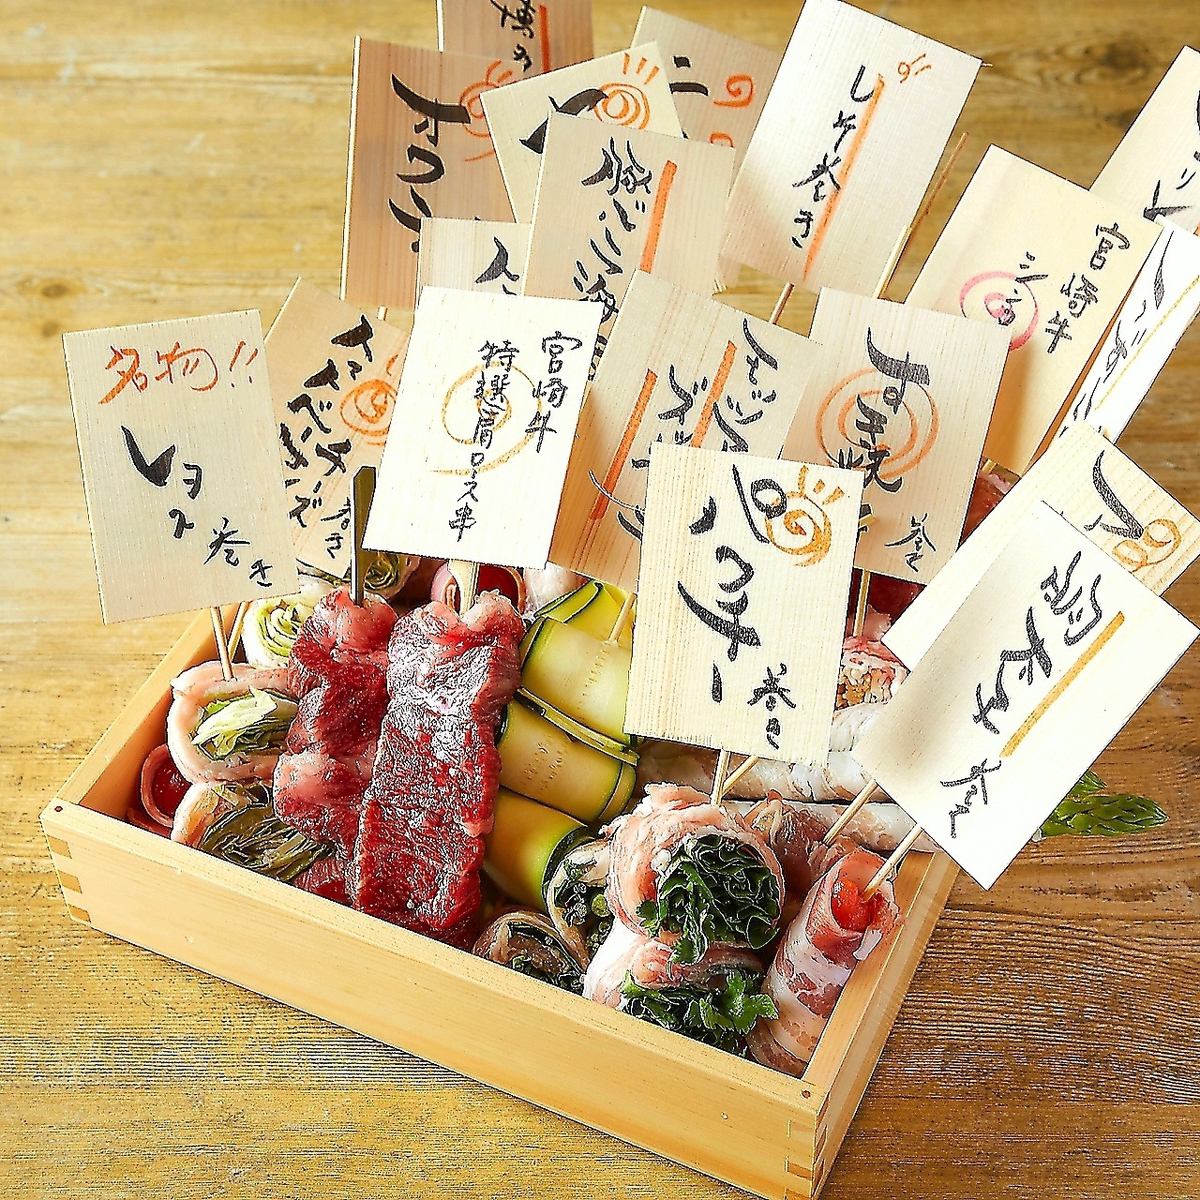 ◆ Specialty vegetable skewers ◆ Tonight, toast with yakitori and beer!